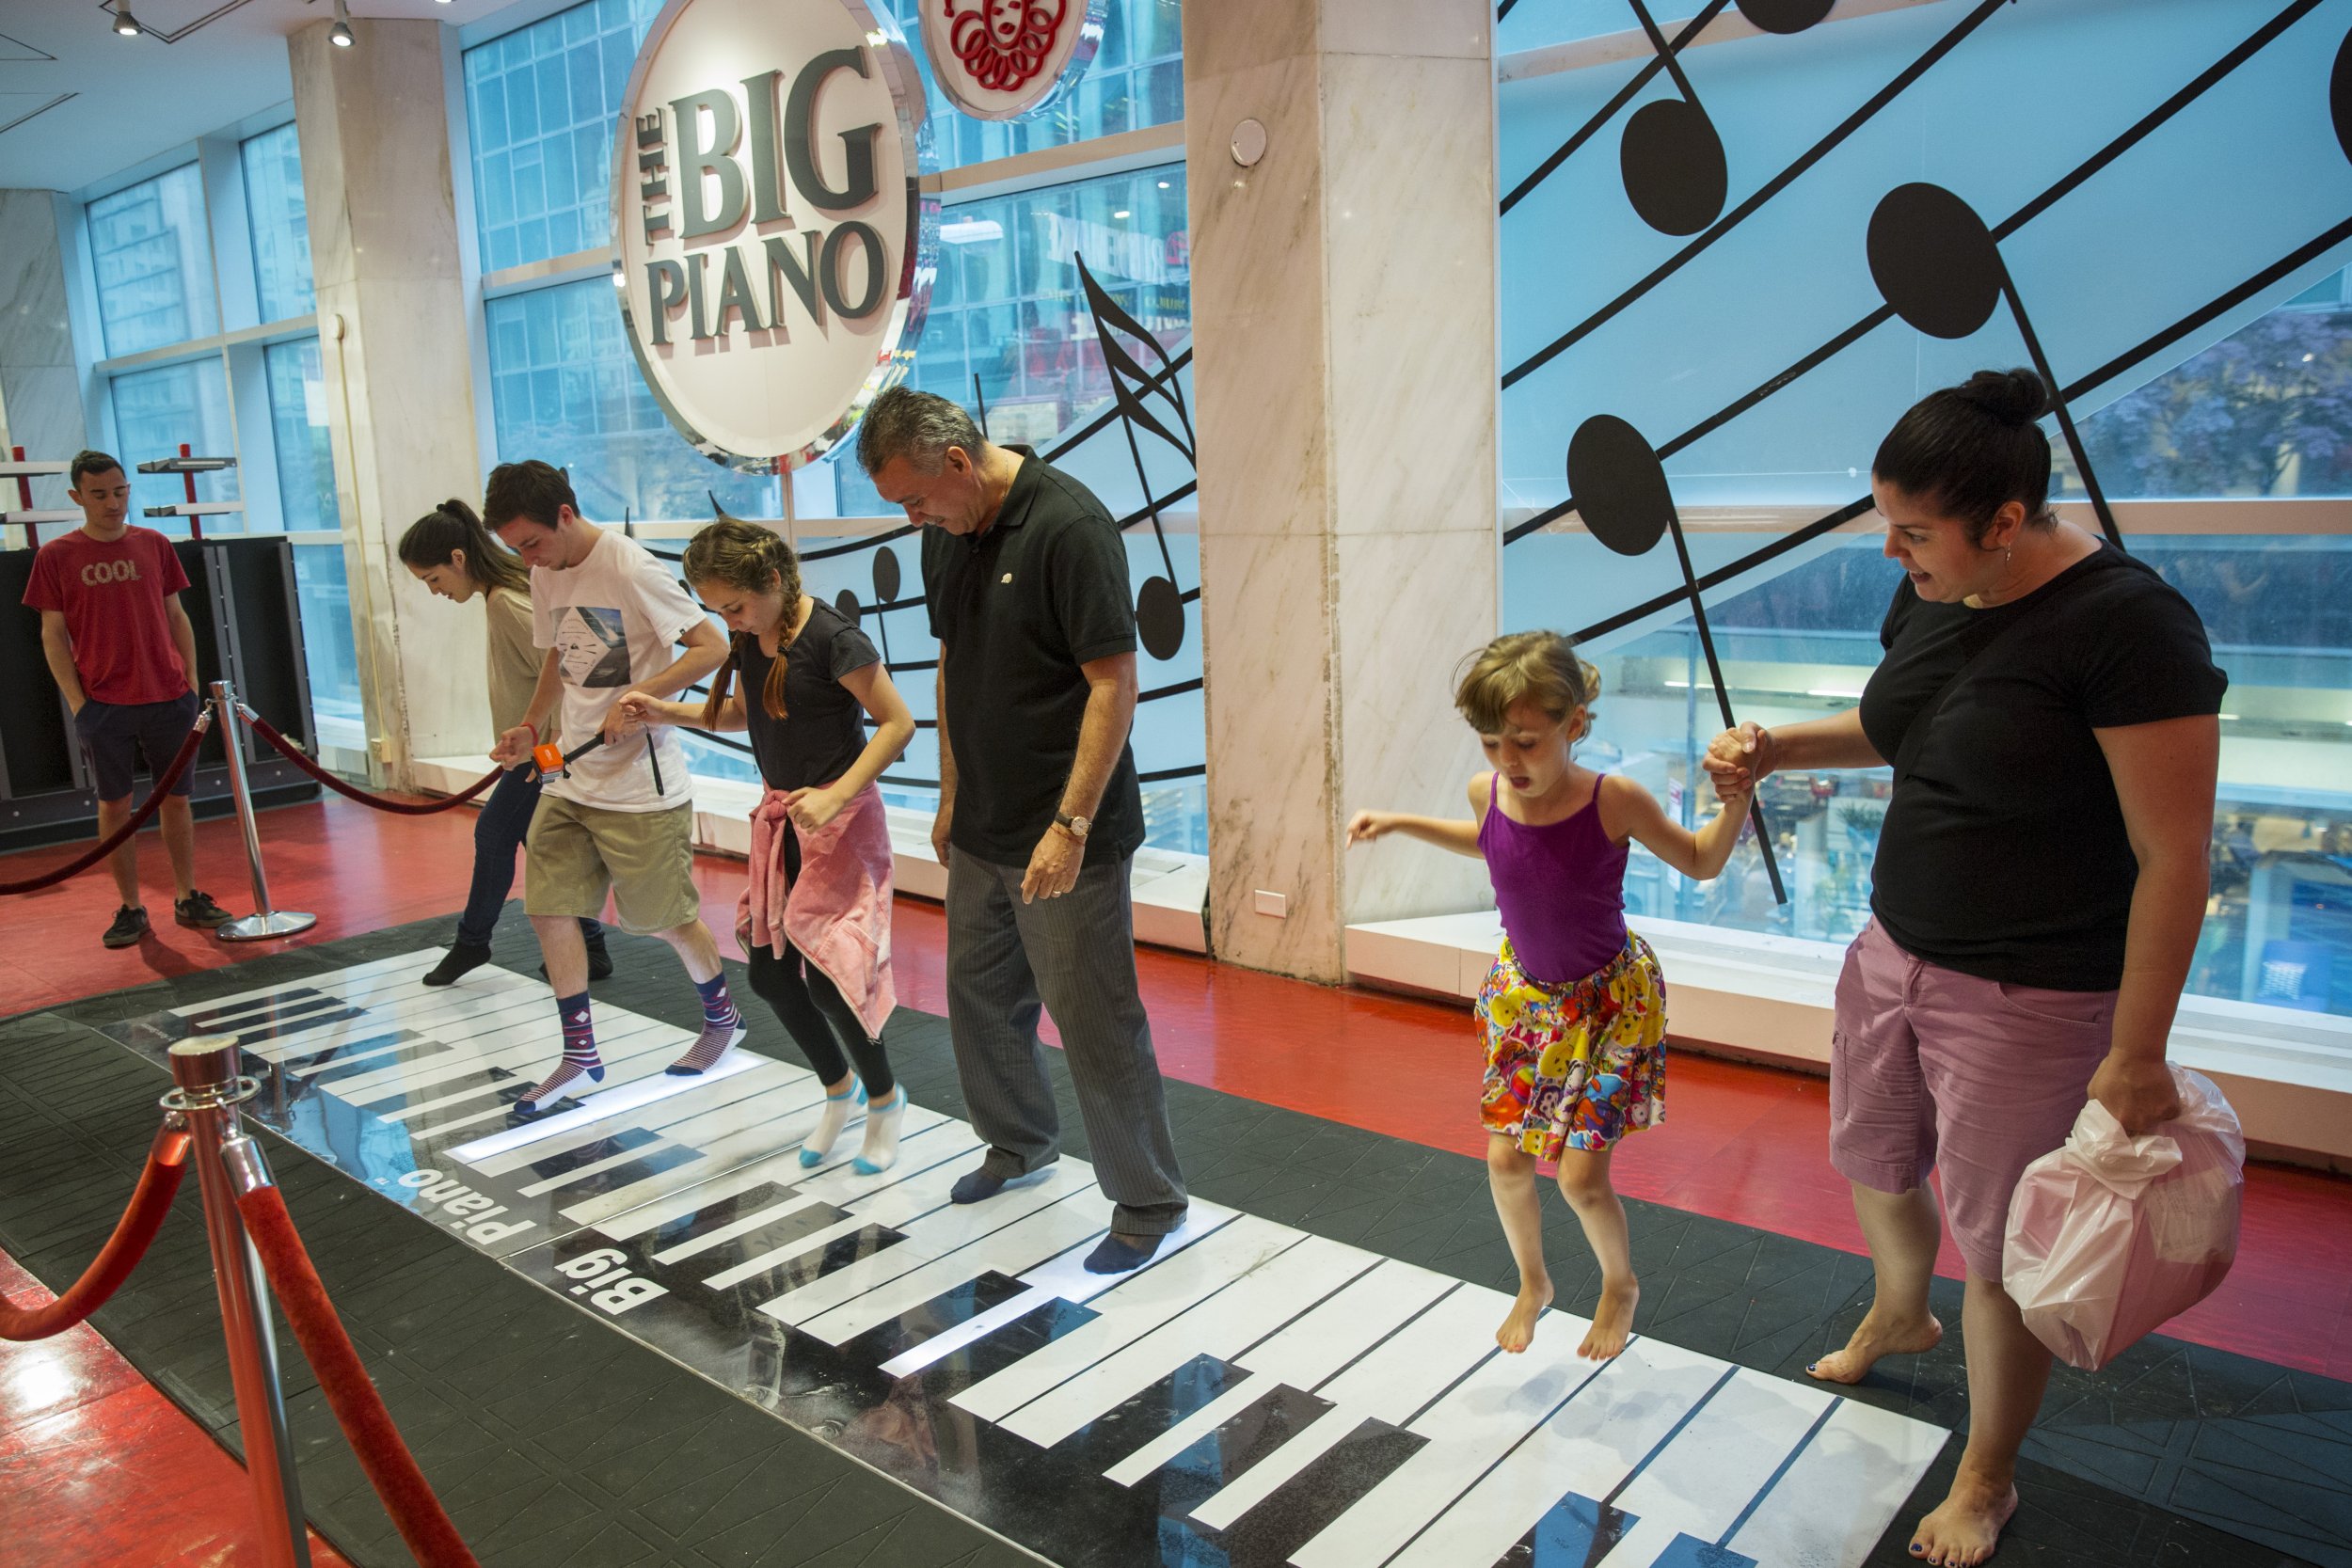 FAO Schwarz Lists Iconic New York City Toy Store on Airbnb